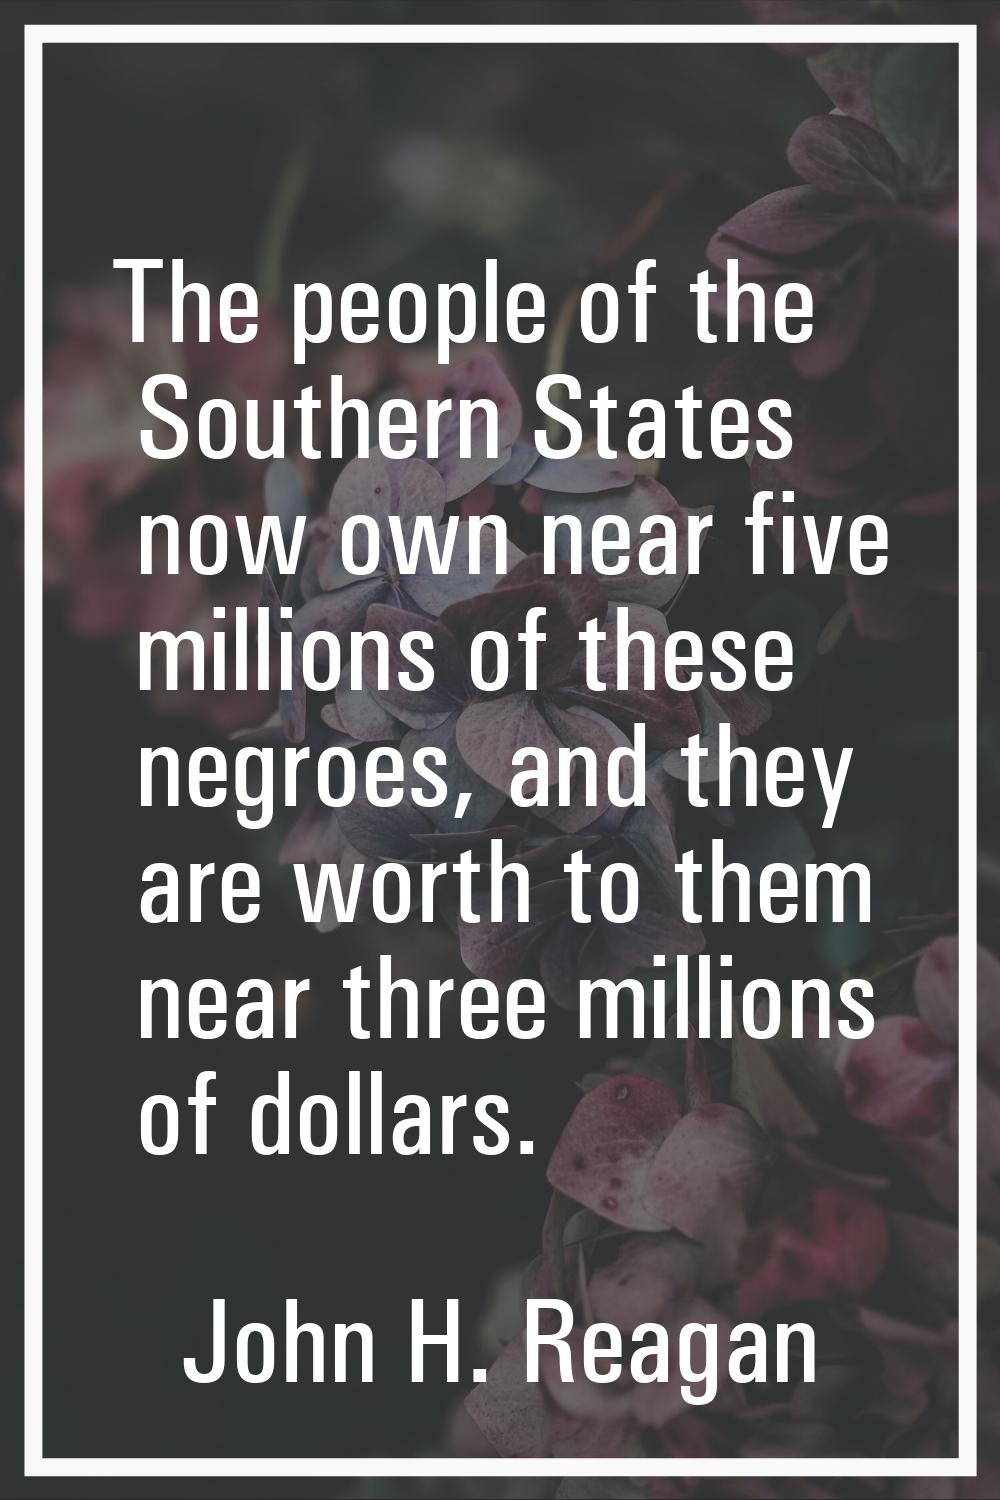 The people of the Southern States now own near five millions of these negroes, and they are worth t